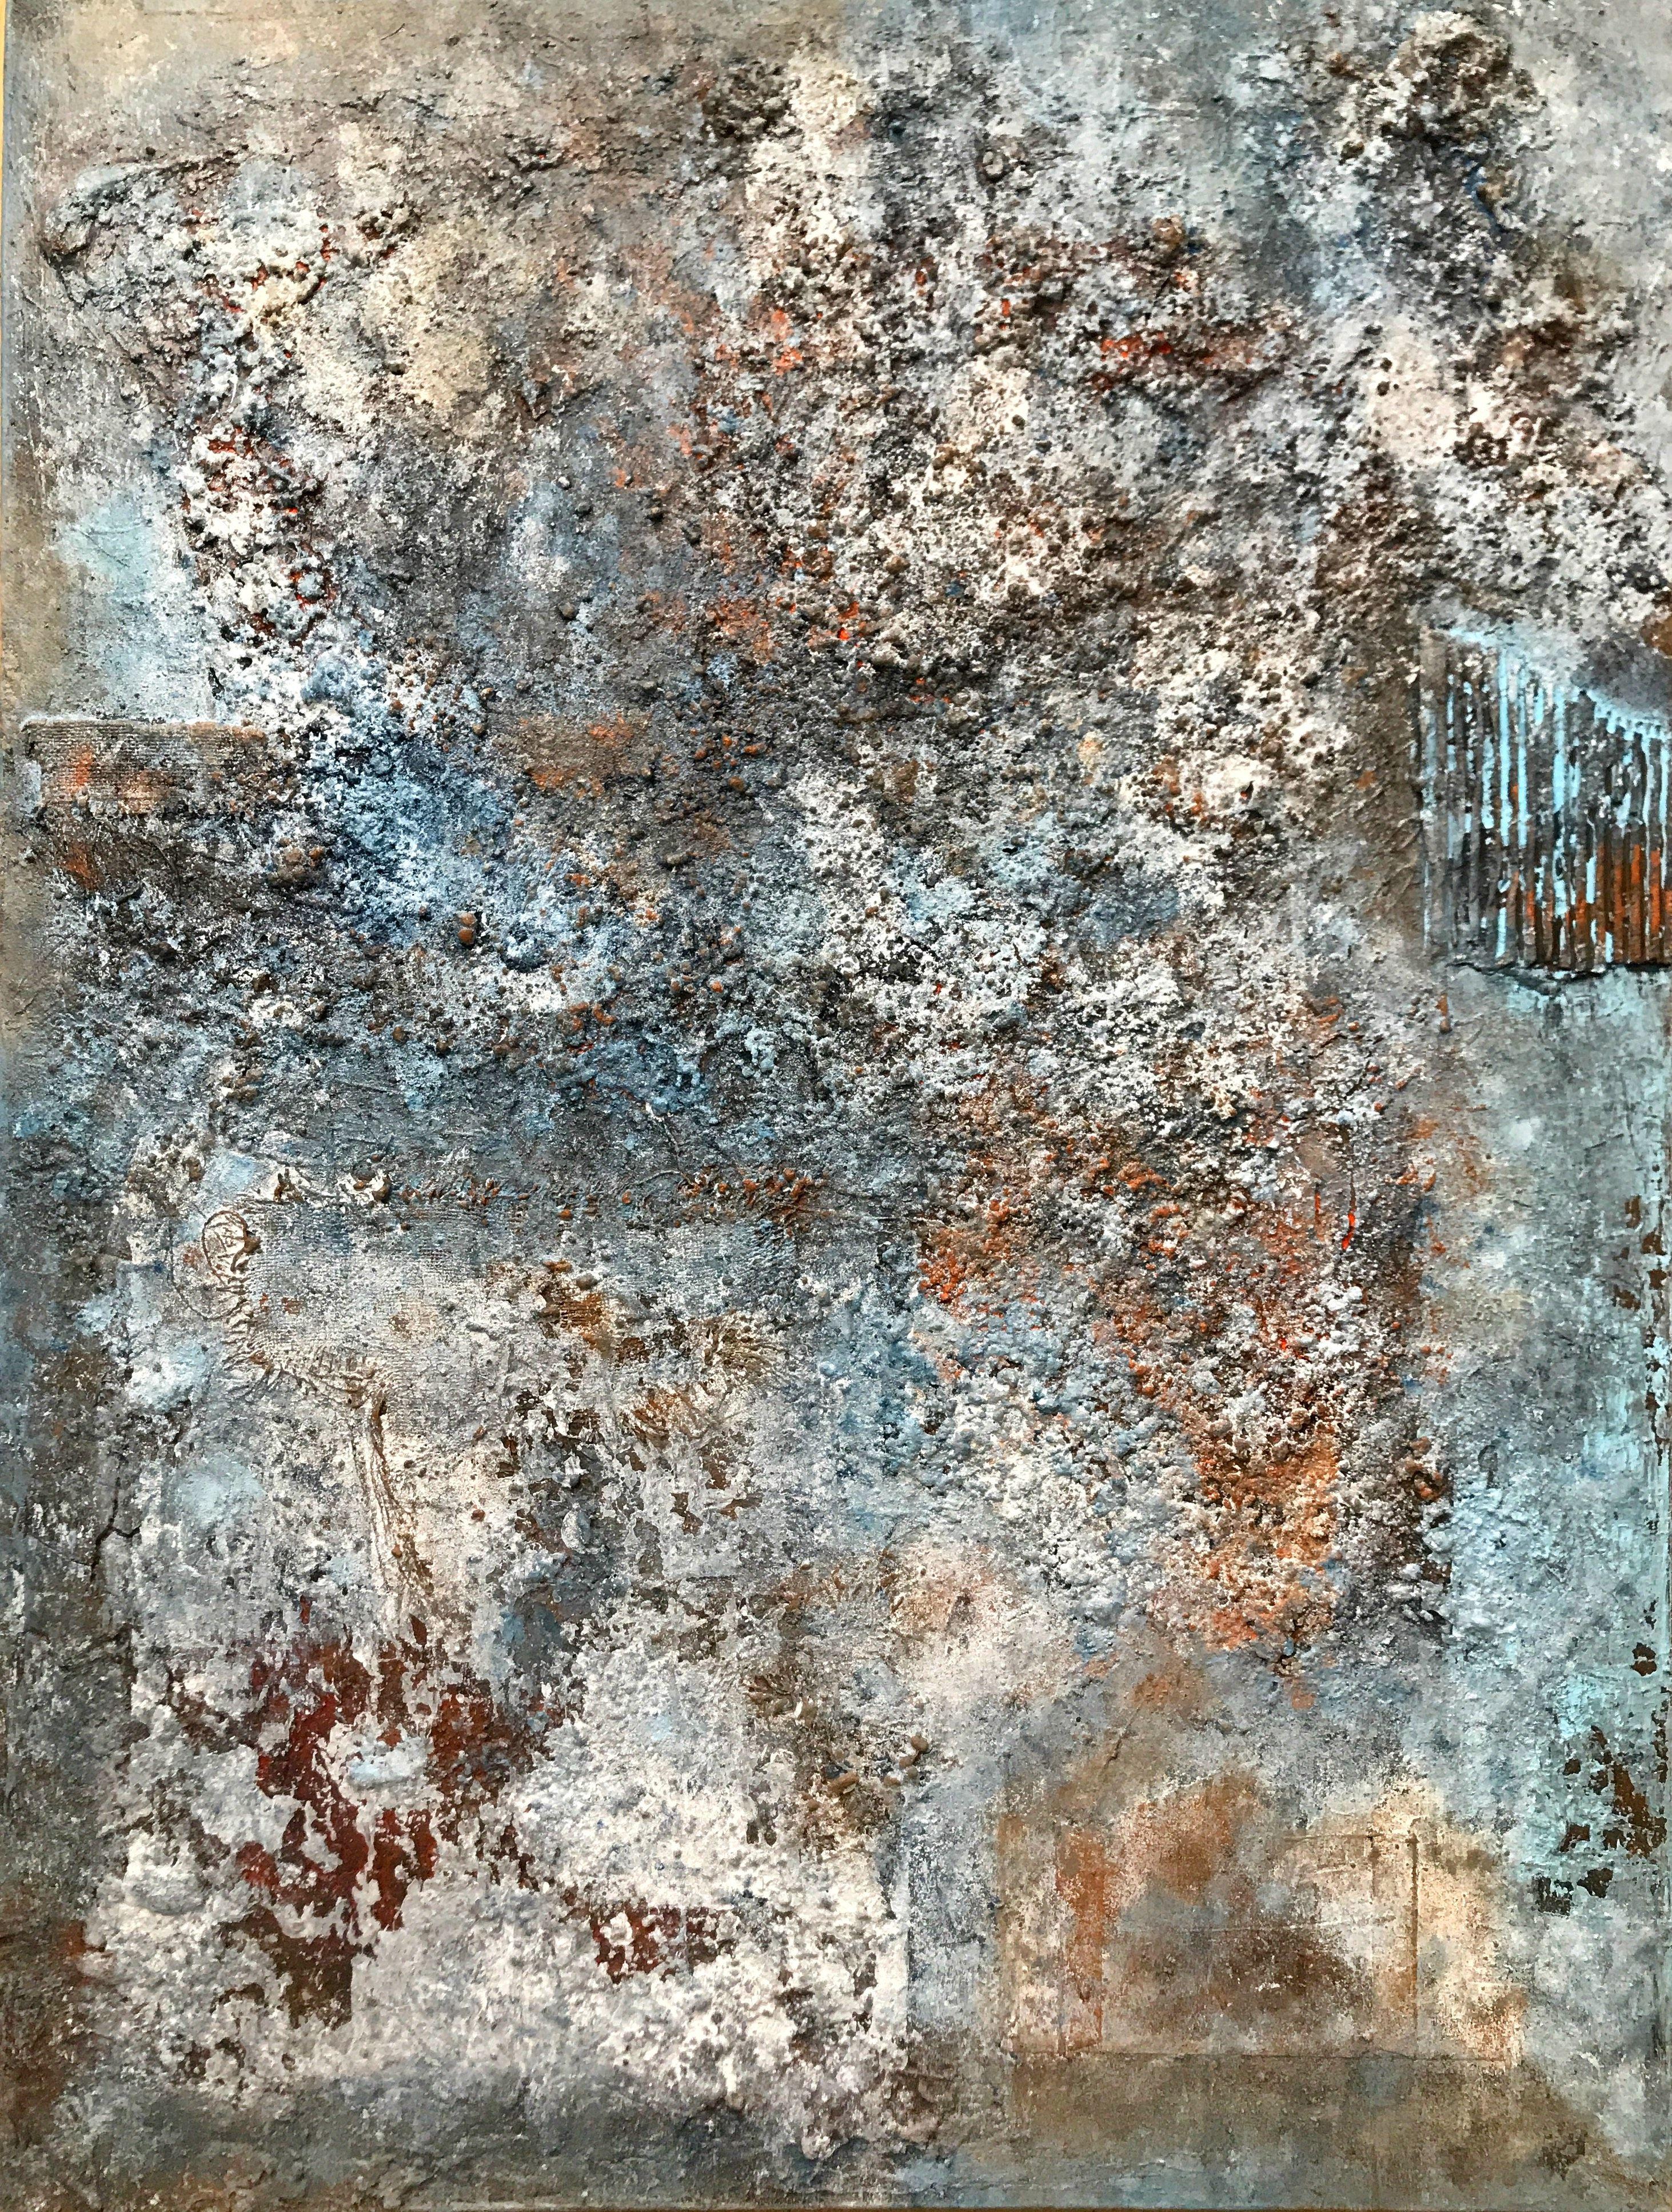 This painting, inspired on decay degradation. rust and steel. mixed media, with deep texture made with gesso, impasto, sand, cardboard, paper and acrylic paint. It will arrive and ready to hang on your wall. A signed certificate of authenticity is